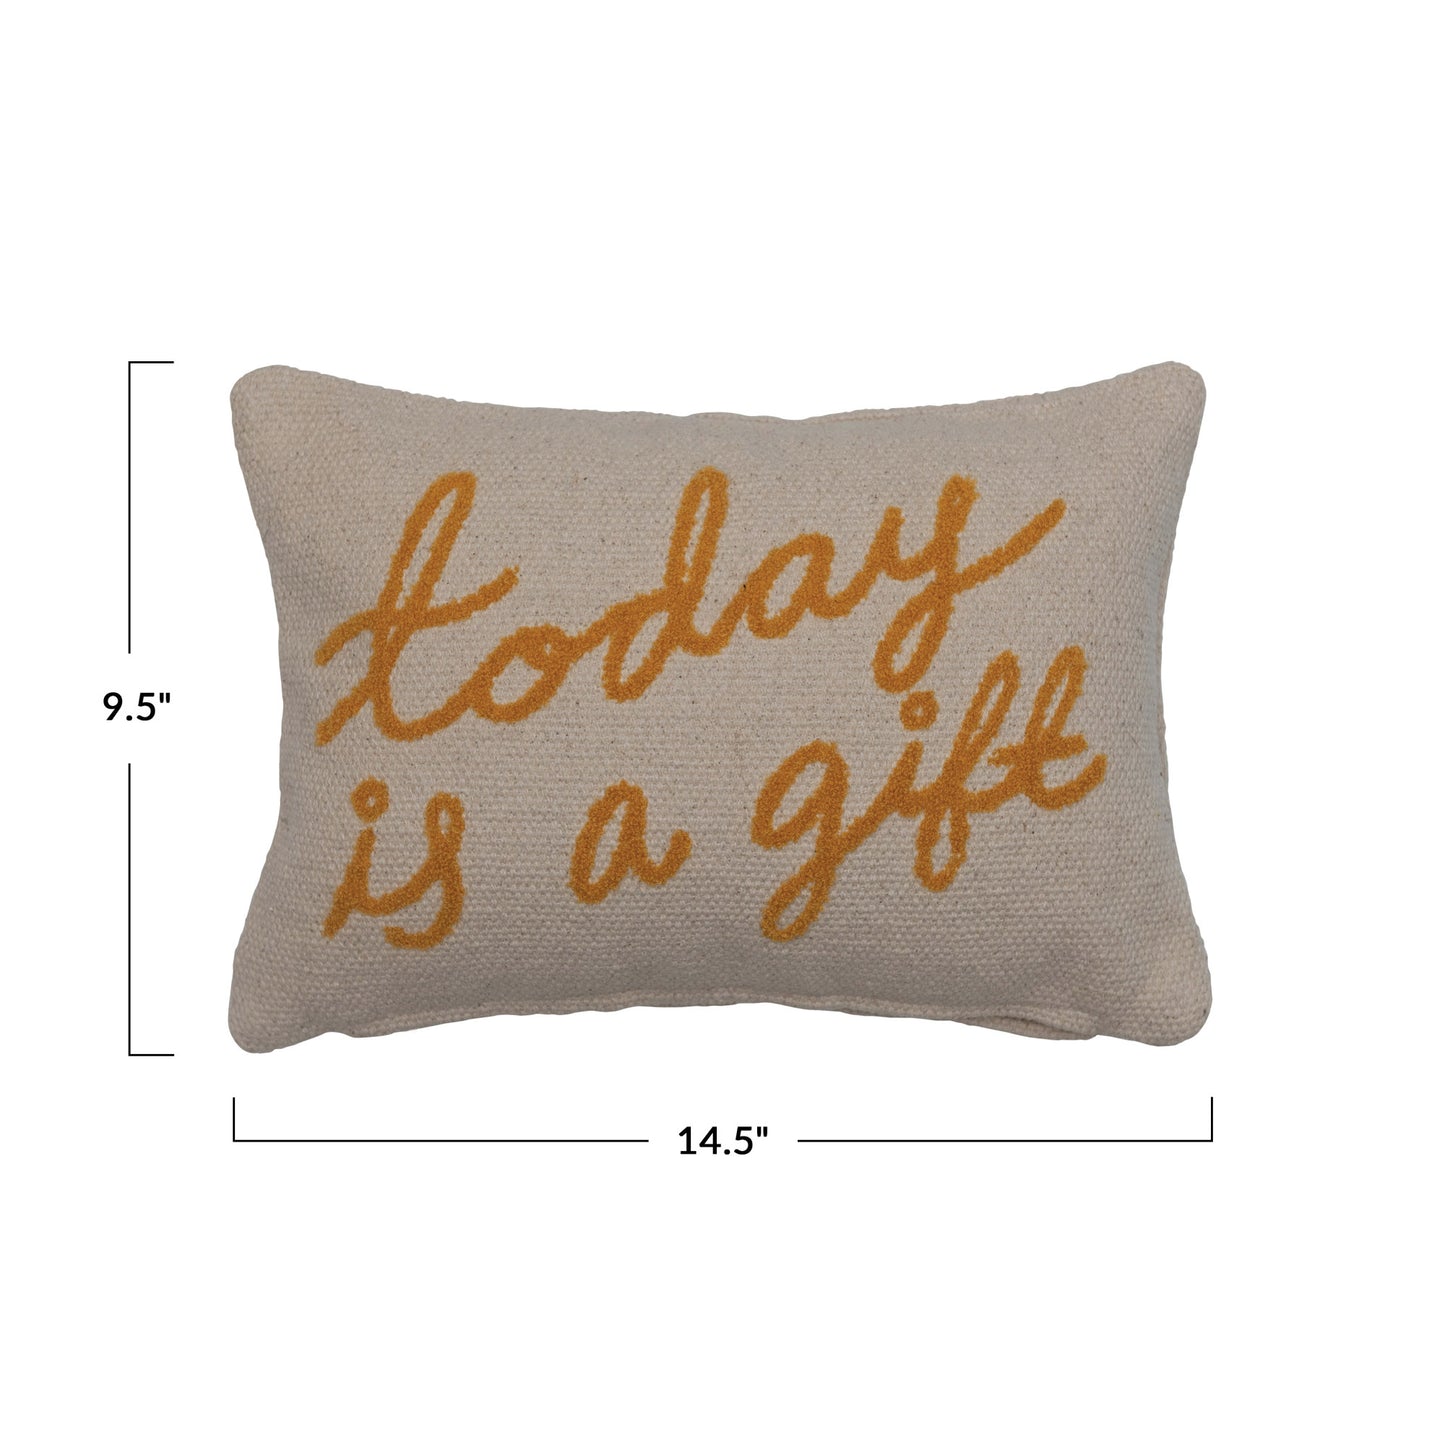 "Today is a Gift" Cotton Lumbar Pillow